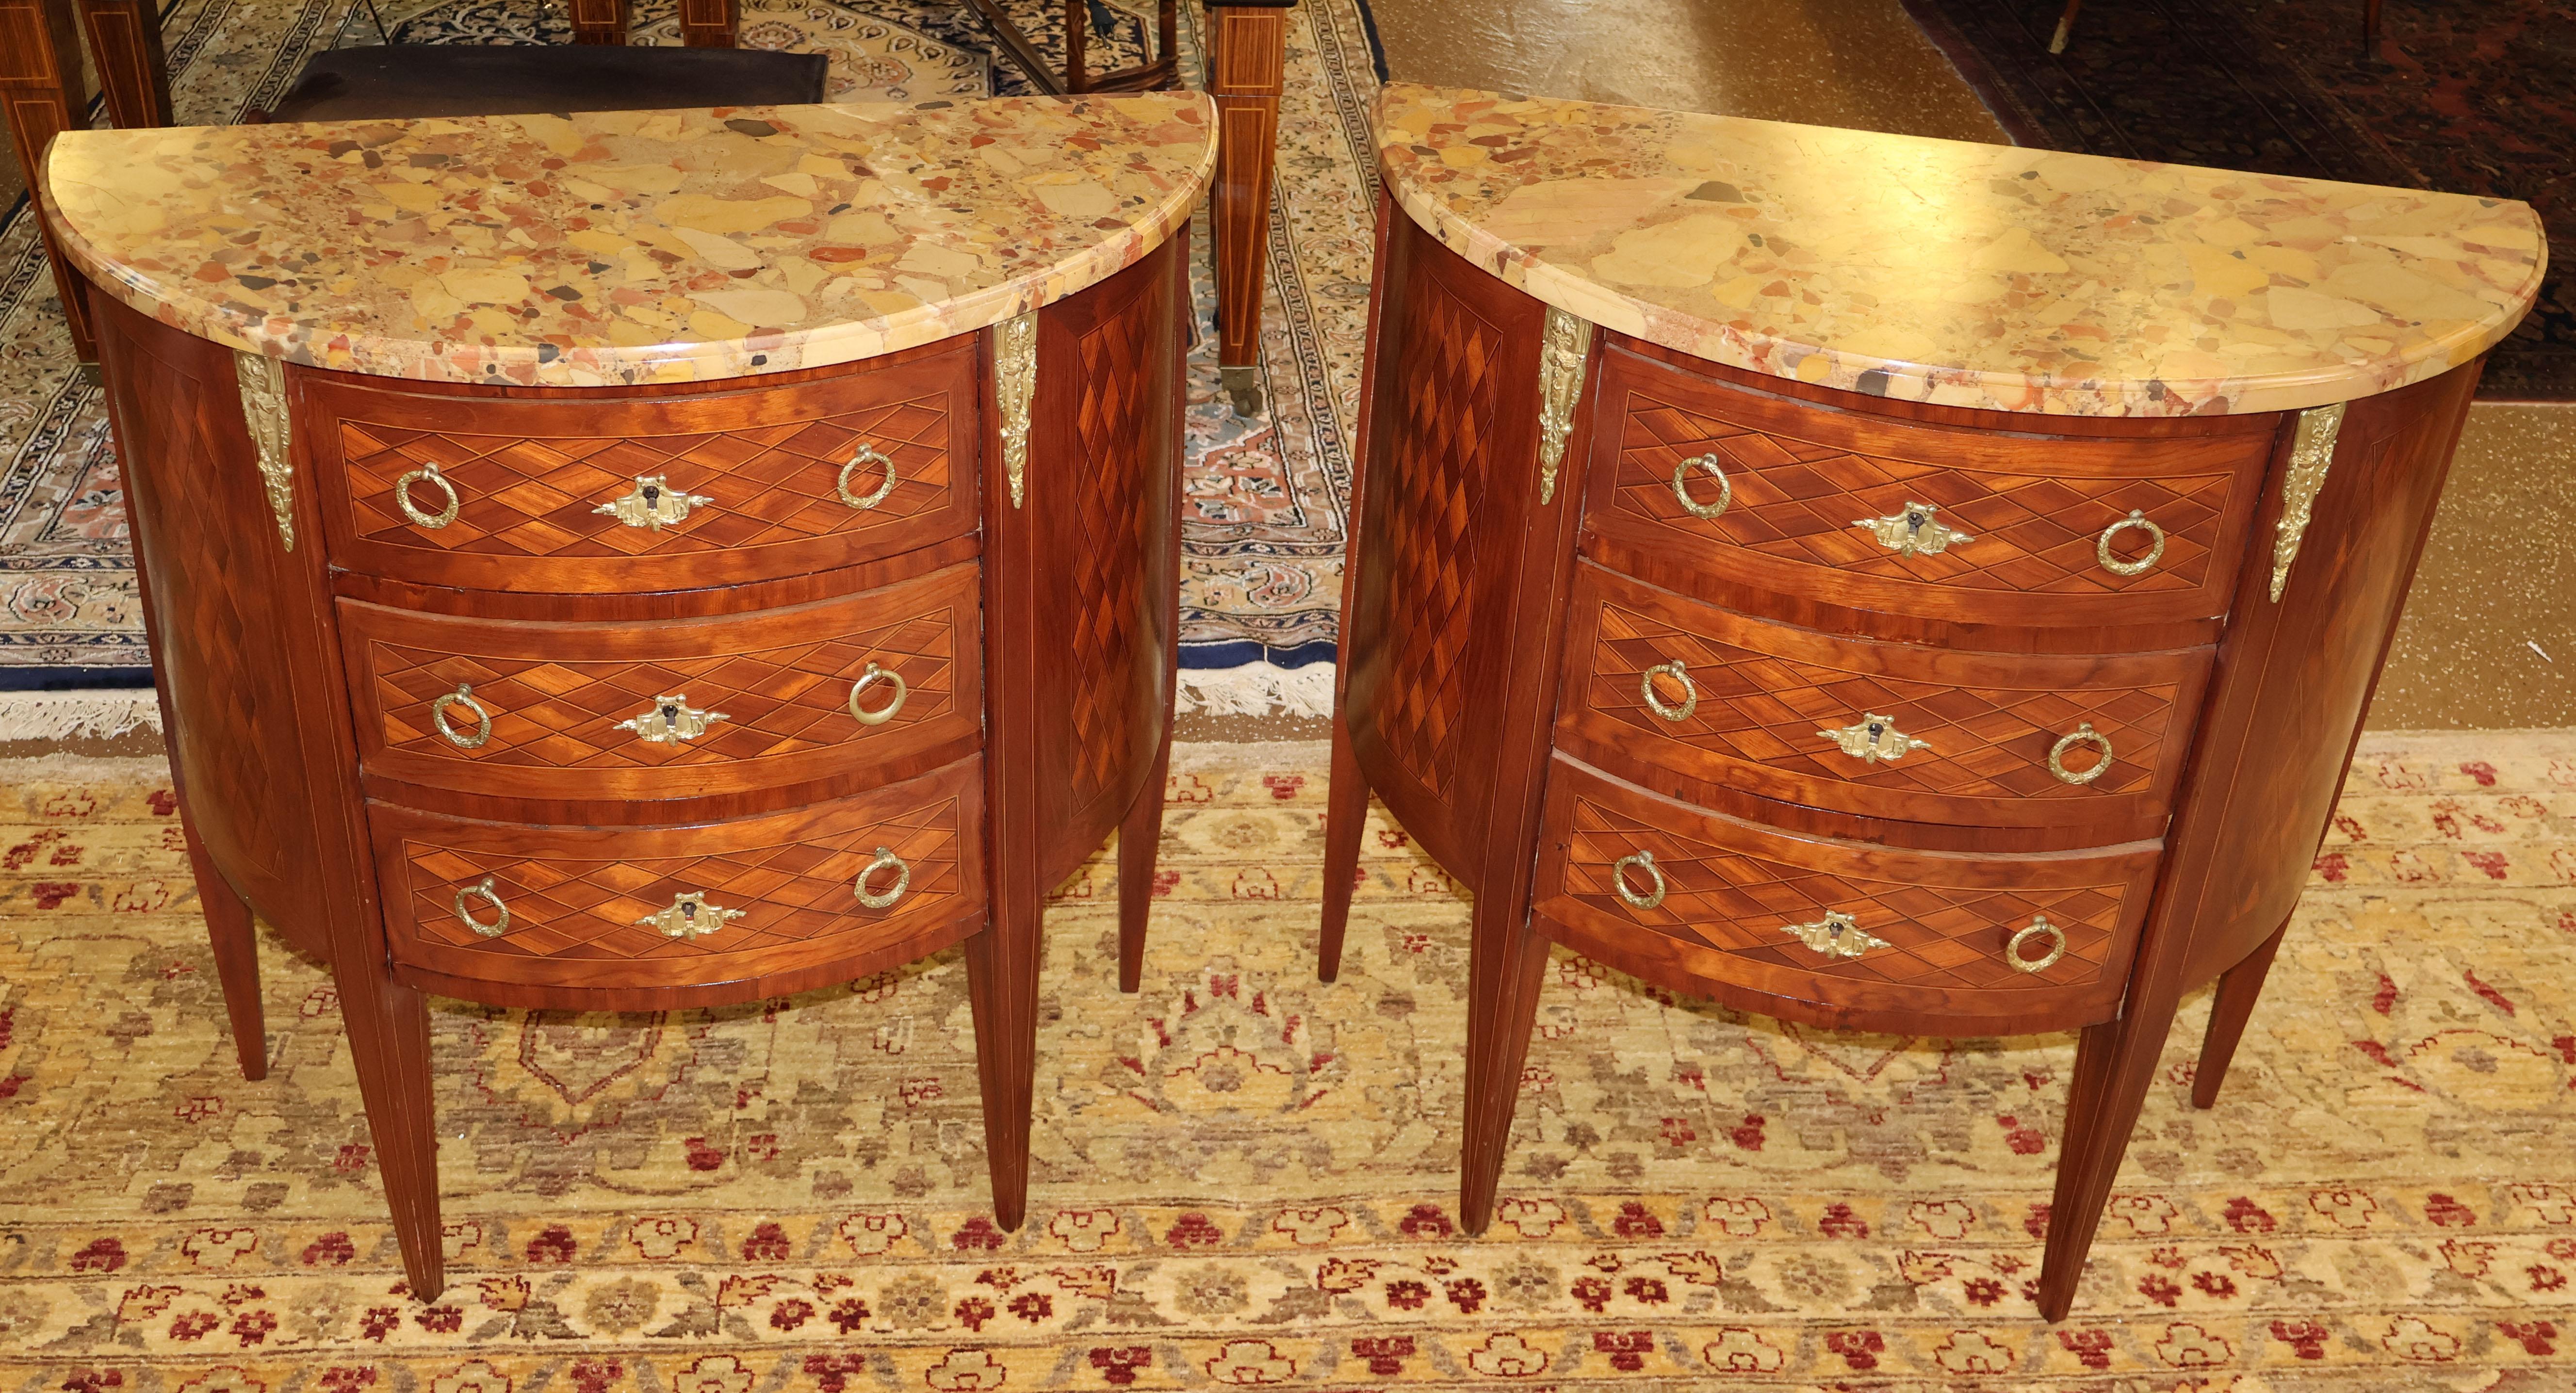 Pair of Early 20th Century Inlaid  French Marble Top End Table Night Stands

Dimensions : 31 X 31 X 15.75

This gorgeous pair of marble top nightstands were made in France in the early 20th century and were imported and sold in NYC. The nightstand